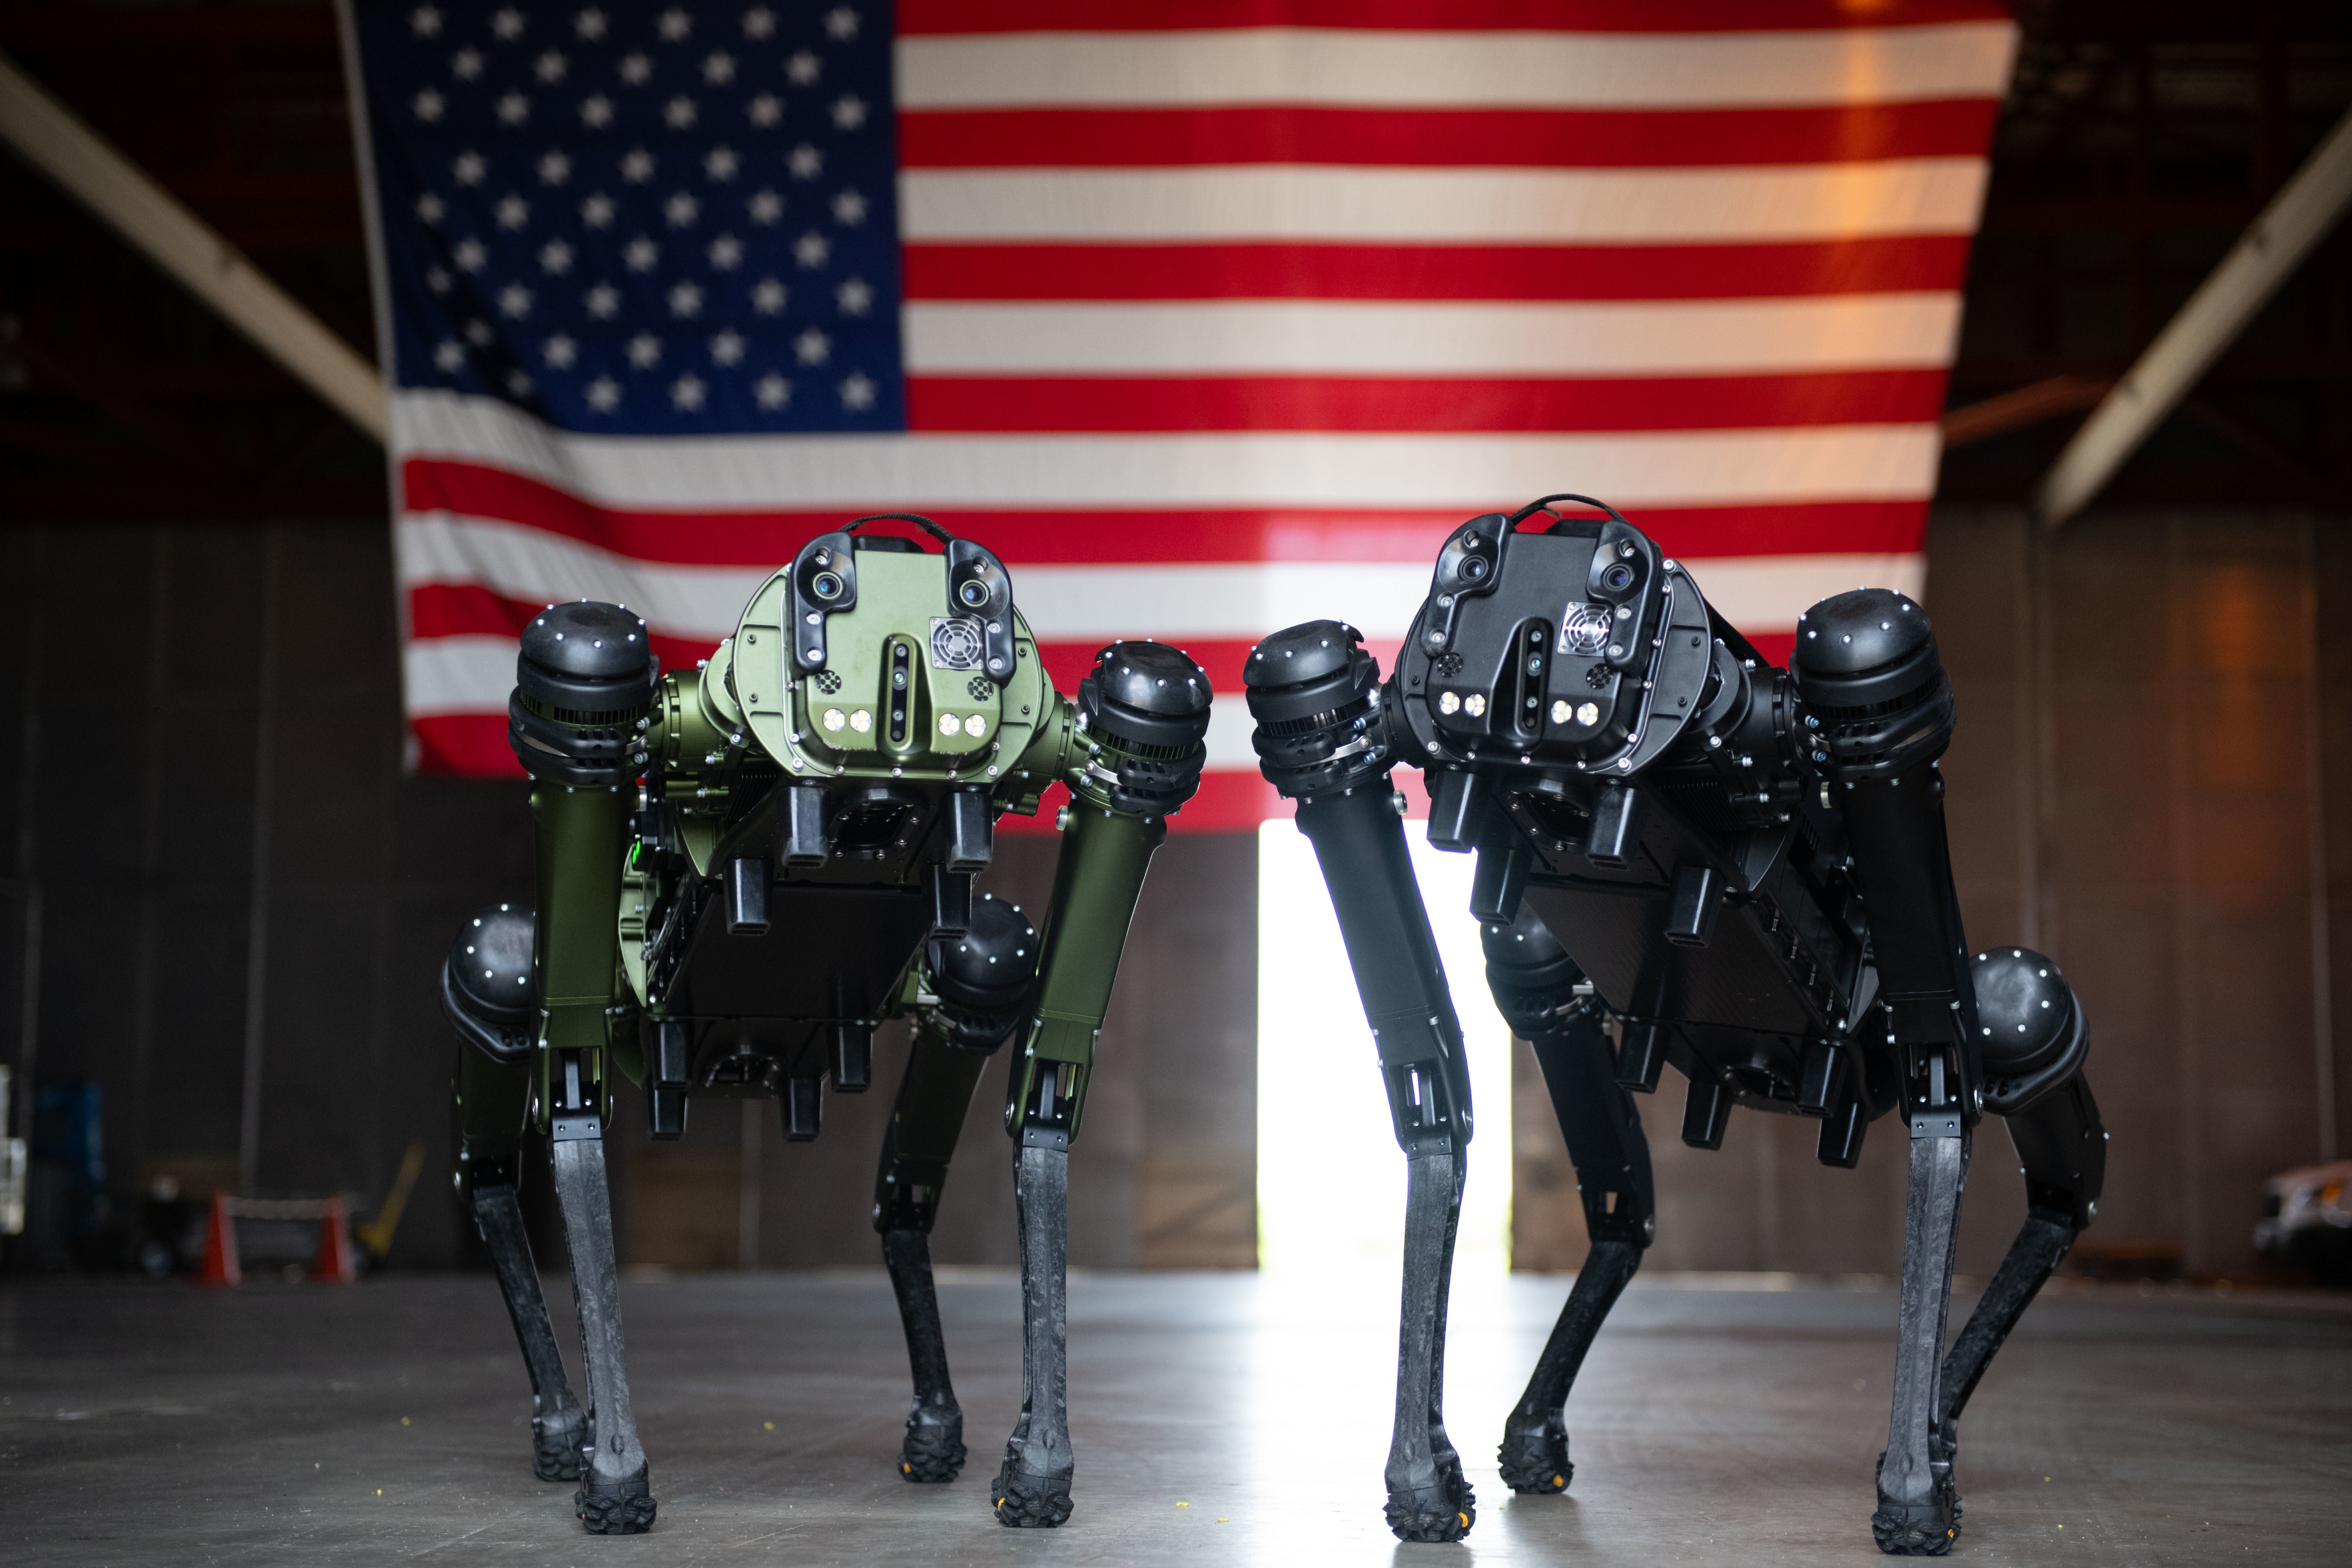 Ghost Robotics Quadruped Unmanned Ground Vehicles (Q-UGV) pose for a  photo at Cape Canaveral Space Force Station, Fla., July 27, 2022. (Photo: DVIDS)